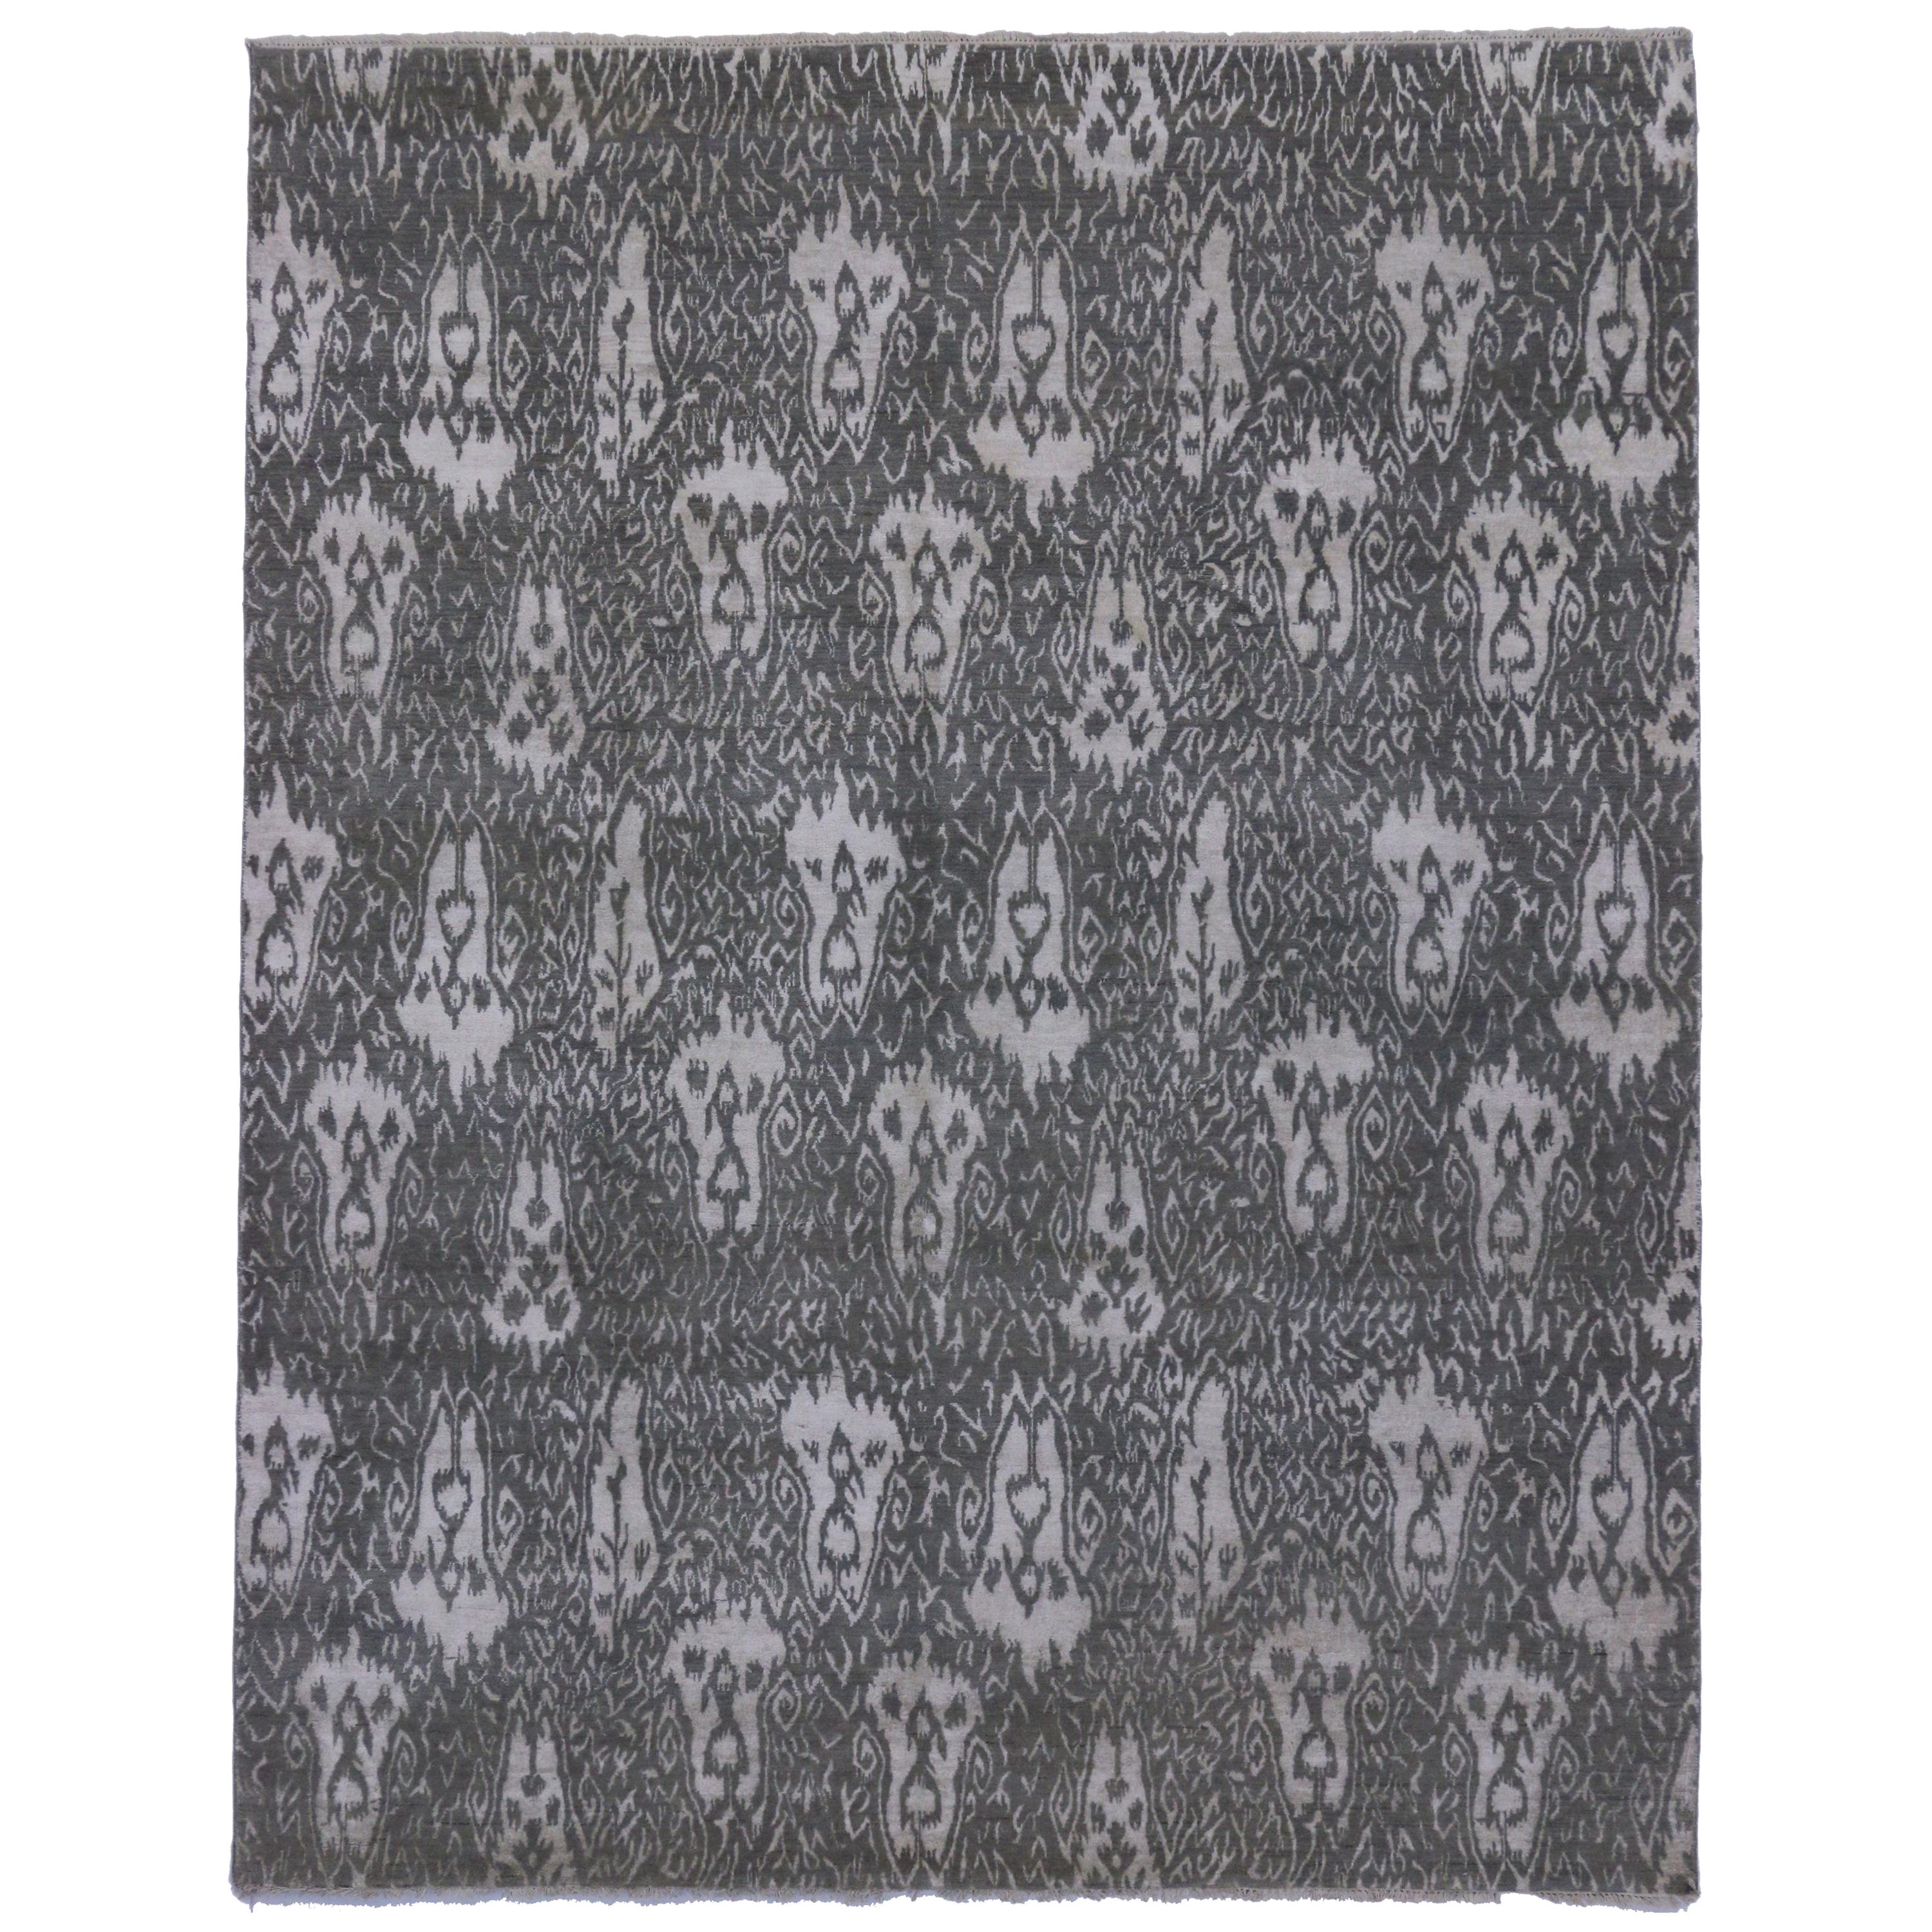 New Transitional Gray Area Rug with Contemporary Style For Sale